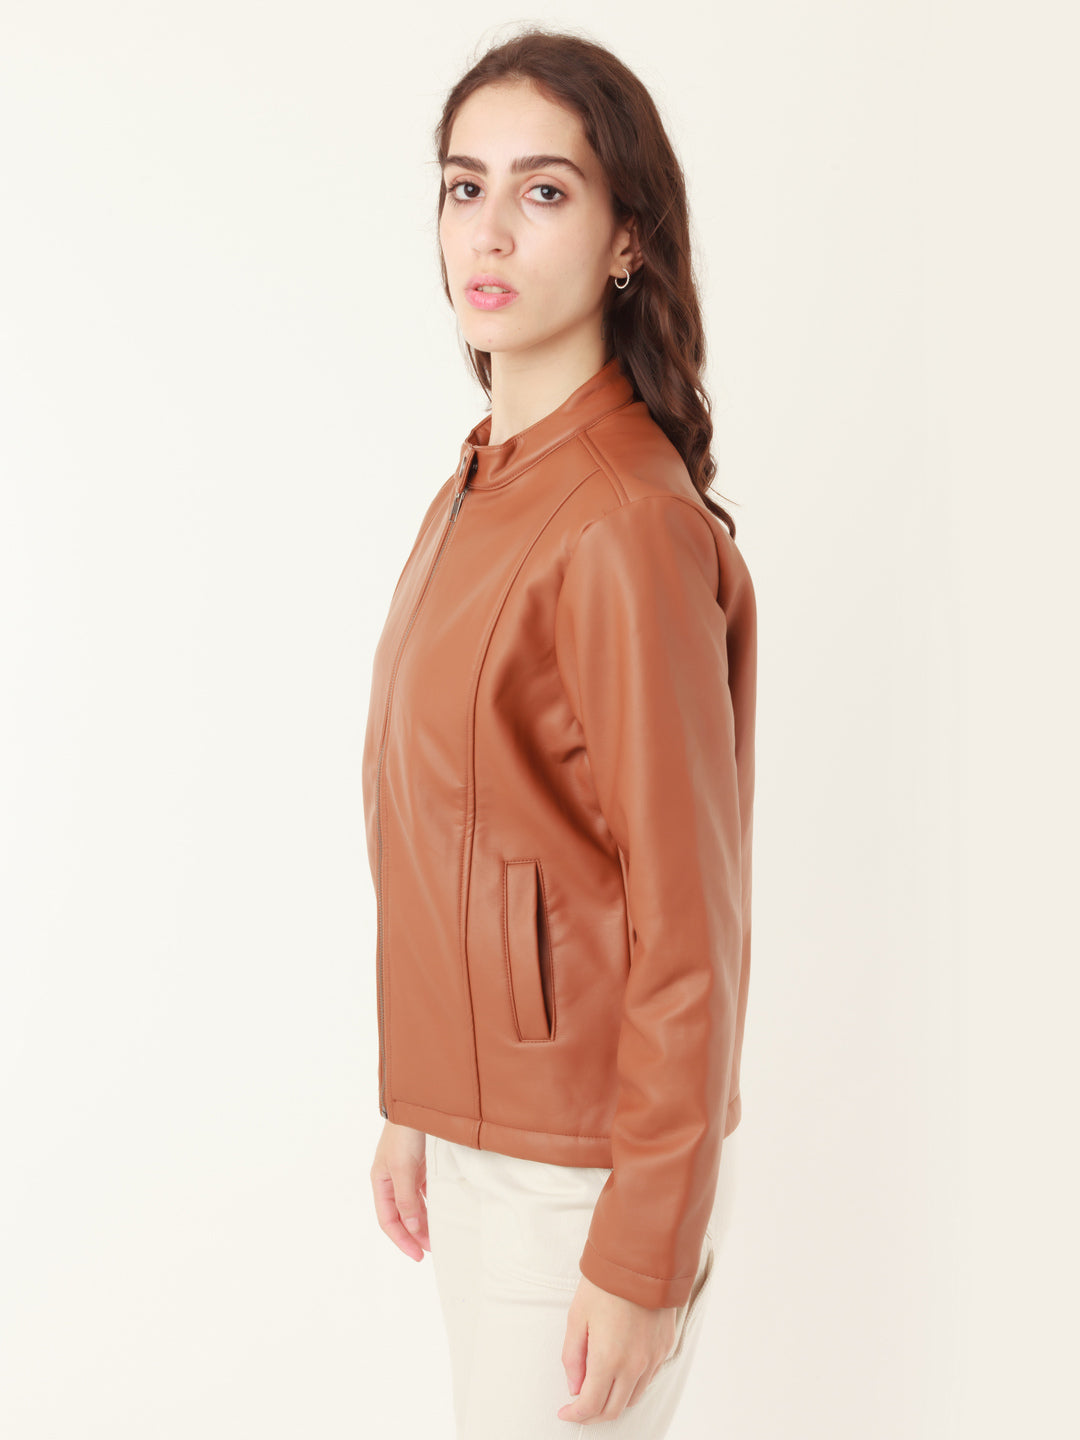 Tan Solid Jacket For Women